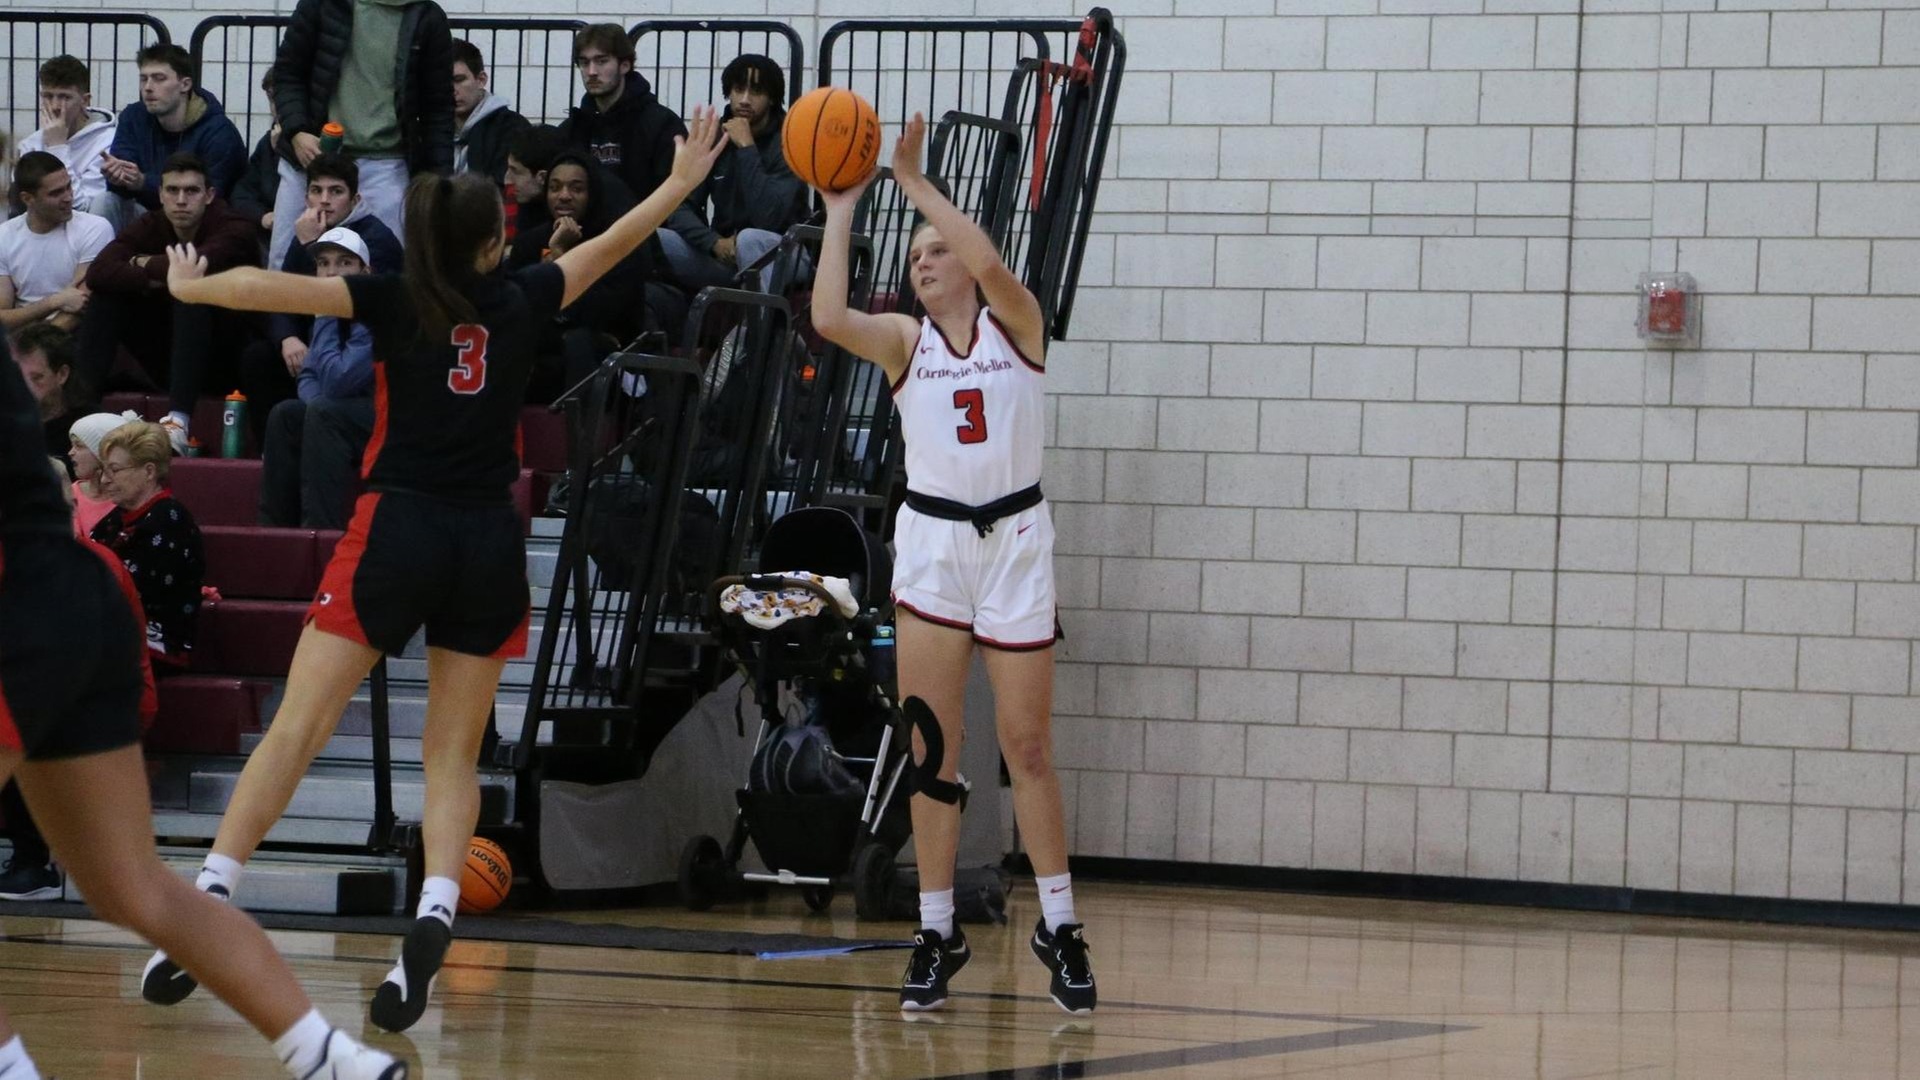 women's basketball player wearing a white uniform takes a shot from the corner of the court